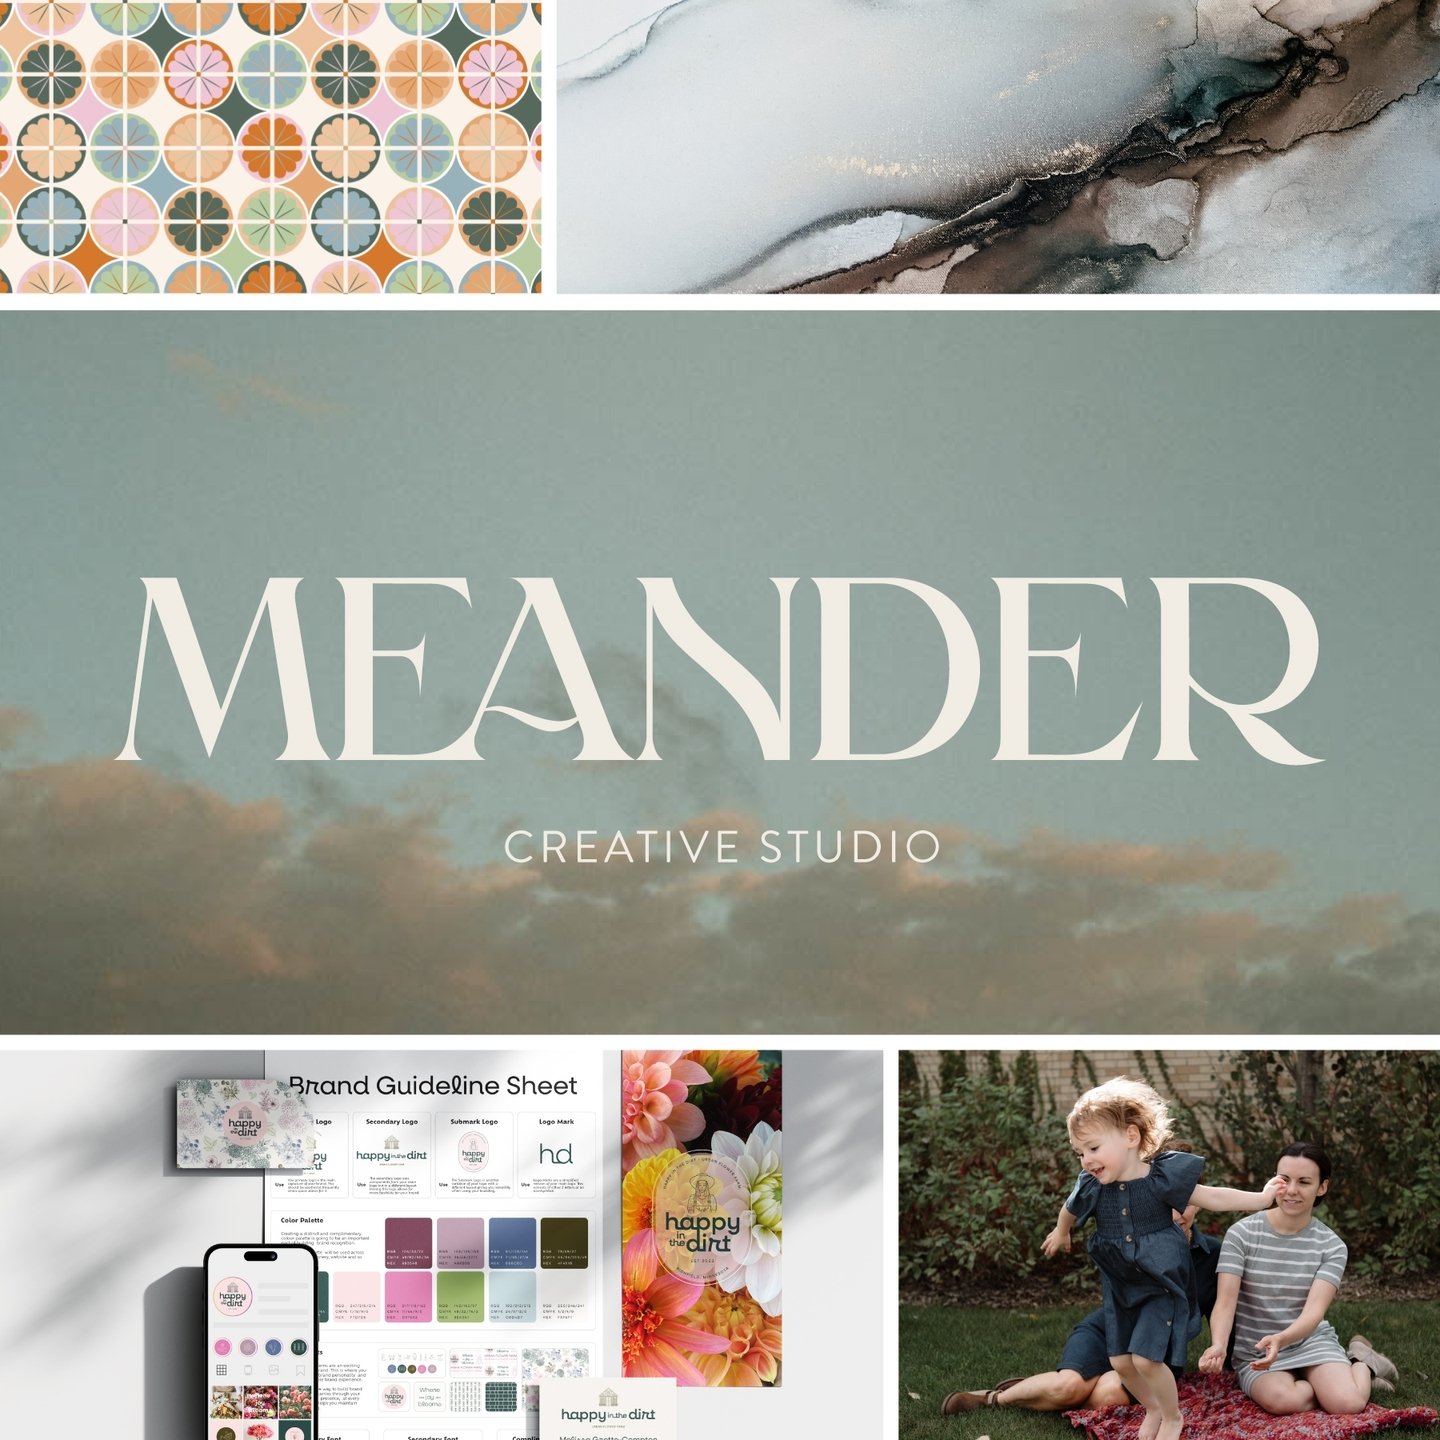 And here we are...Meander Creative Studio 🤍

The Meander Vision :: In envisioning my journey, I aspire to craft a life adorned with the vibrant hues of artistry and design, where every stroke, every creation, breathes life into my existence. I seek 